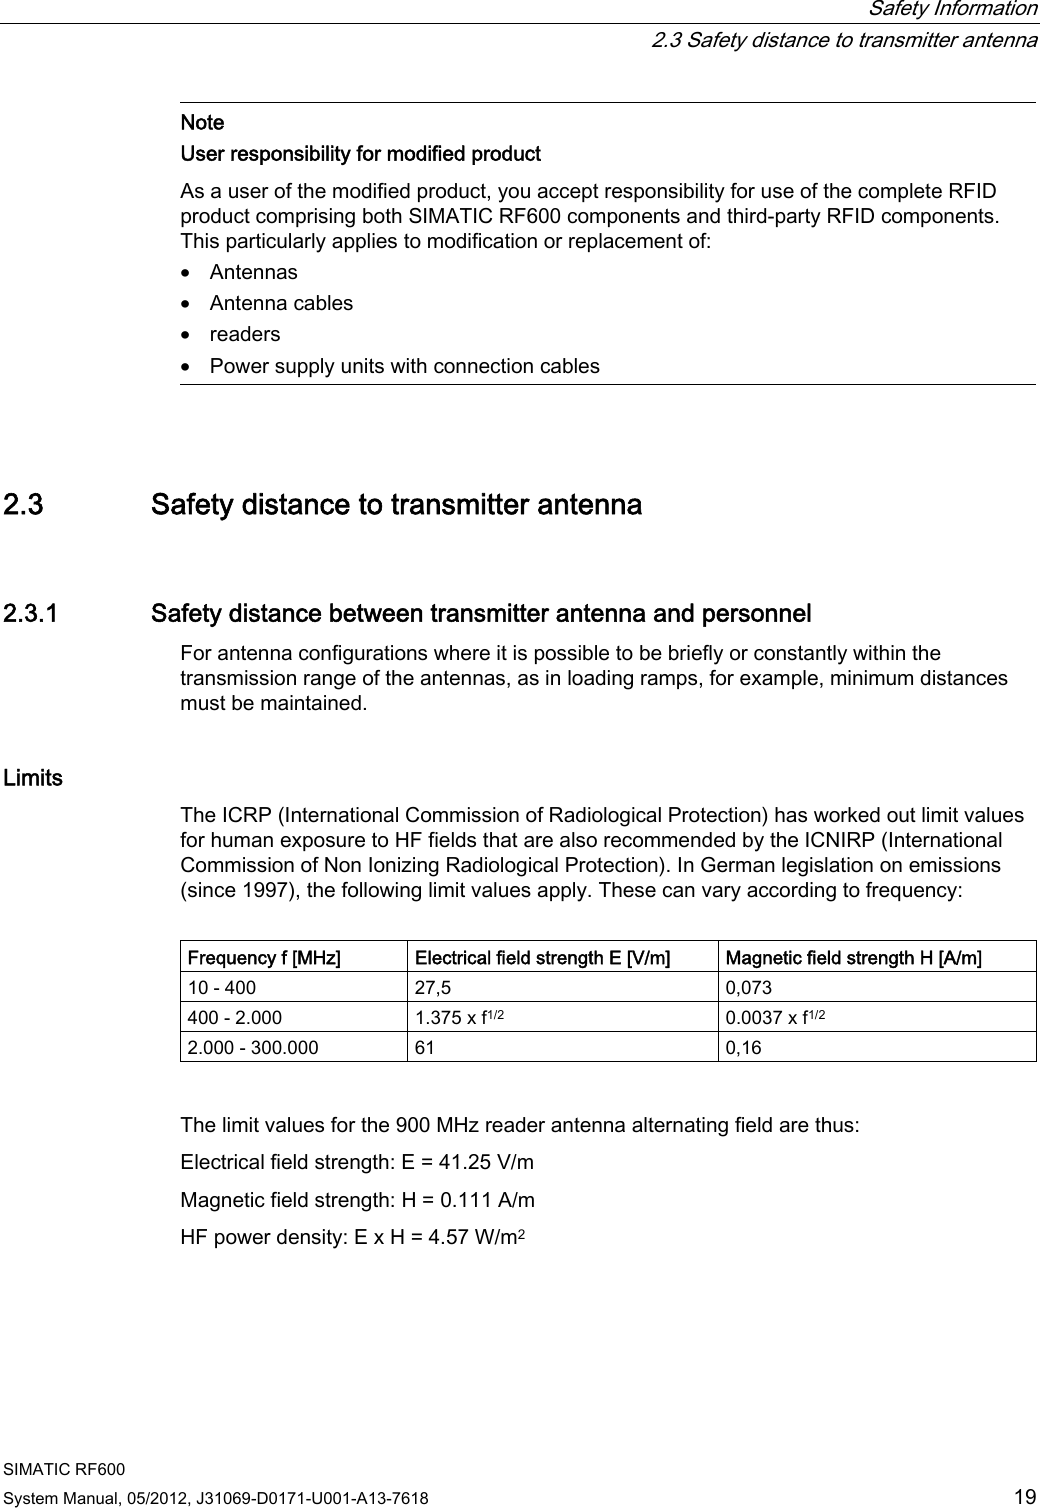  Safety Information   2.3 Safety distance to transmitter antenna SIMATIC RF600 System Manual, 05/2012, J31069-D0171-U001-A13-7618  19  Note User responsibility for modified product As a user of the modified product, you accept responsibility for use of the complete RFID product comprising both SIMATIC RF600 components and third-party RFID components. This particularly applies to modification or replacement of: • Antennas • Antenna cables • readers • Power supply units with connection cables  2.3 Safety distance to transmitter antenna 2.3.1 Safety distance between transmitter antenna and personnel For antenna configurations where it is possible to be briefly or constantly within the transmission range of the antennas, as in loading ramps, for example, minimum distances must be maintained.  Limits The ICRP (International Commission of Radiological Protection) has worked out limit values for human exposure to HF fields that are also recommended by the ICNIRP (International Commission of Non Ionizing Radiological Protection). In German legislation on emissions (since 1997), the following limit values apply. These can vary according to frequency:  Frequency f [MHz] Electrical field strength E [V/m] Magnetic field strength H [A/m] 10 - 400  27,5  0,073 400 - 2.000  1.375 x f1/2  0.0037 x f1/2 2.000 - 300.000  61  0,16  The limit values for the 900 MHz reader antenna alternating field are thus: Electrical field strength: E = 41.25 V/m Magnetic field strength: H = 0.111 A/m HF power density: E x H = 4.57 W/m2 